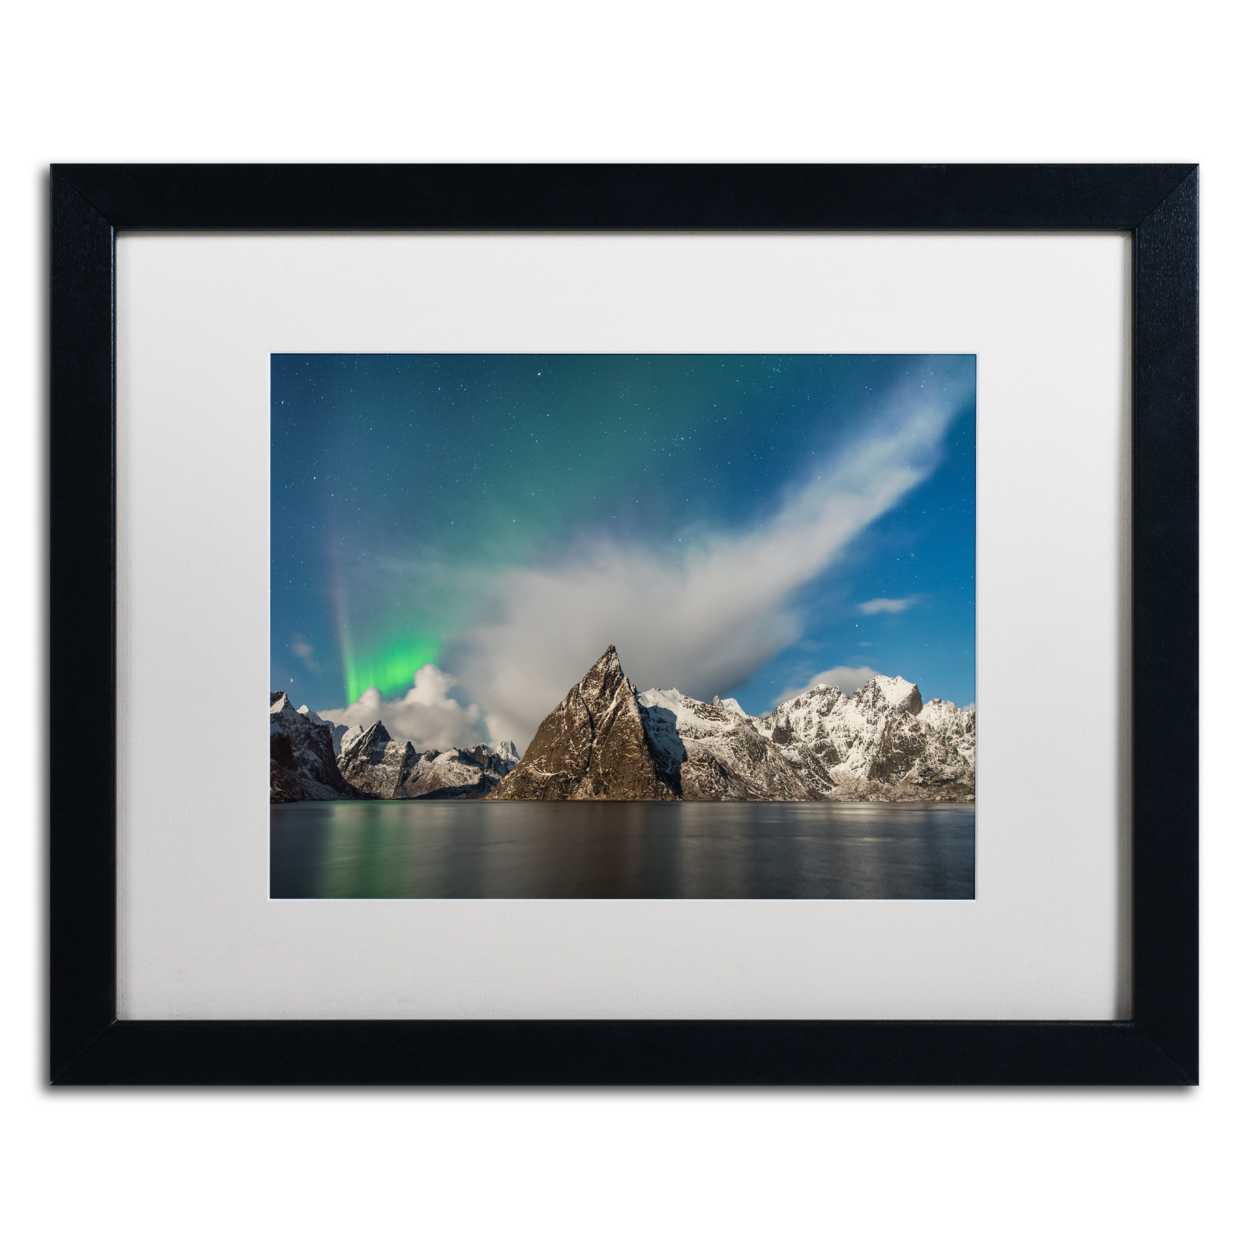 Michael Blanchette Photography 'Plumes' Black Wooden Framed Art 18 X 22 Inches